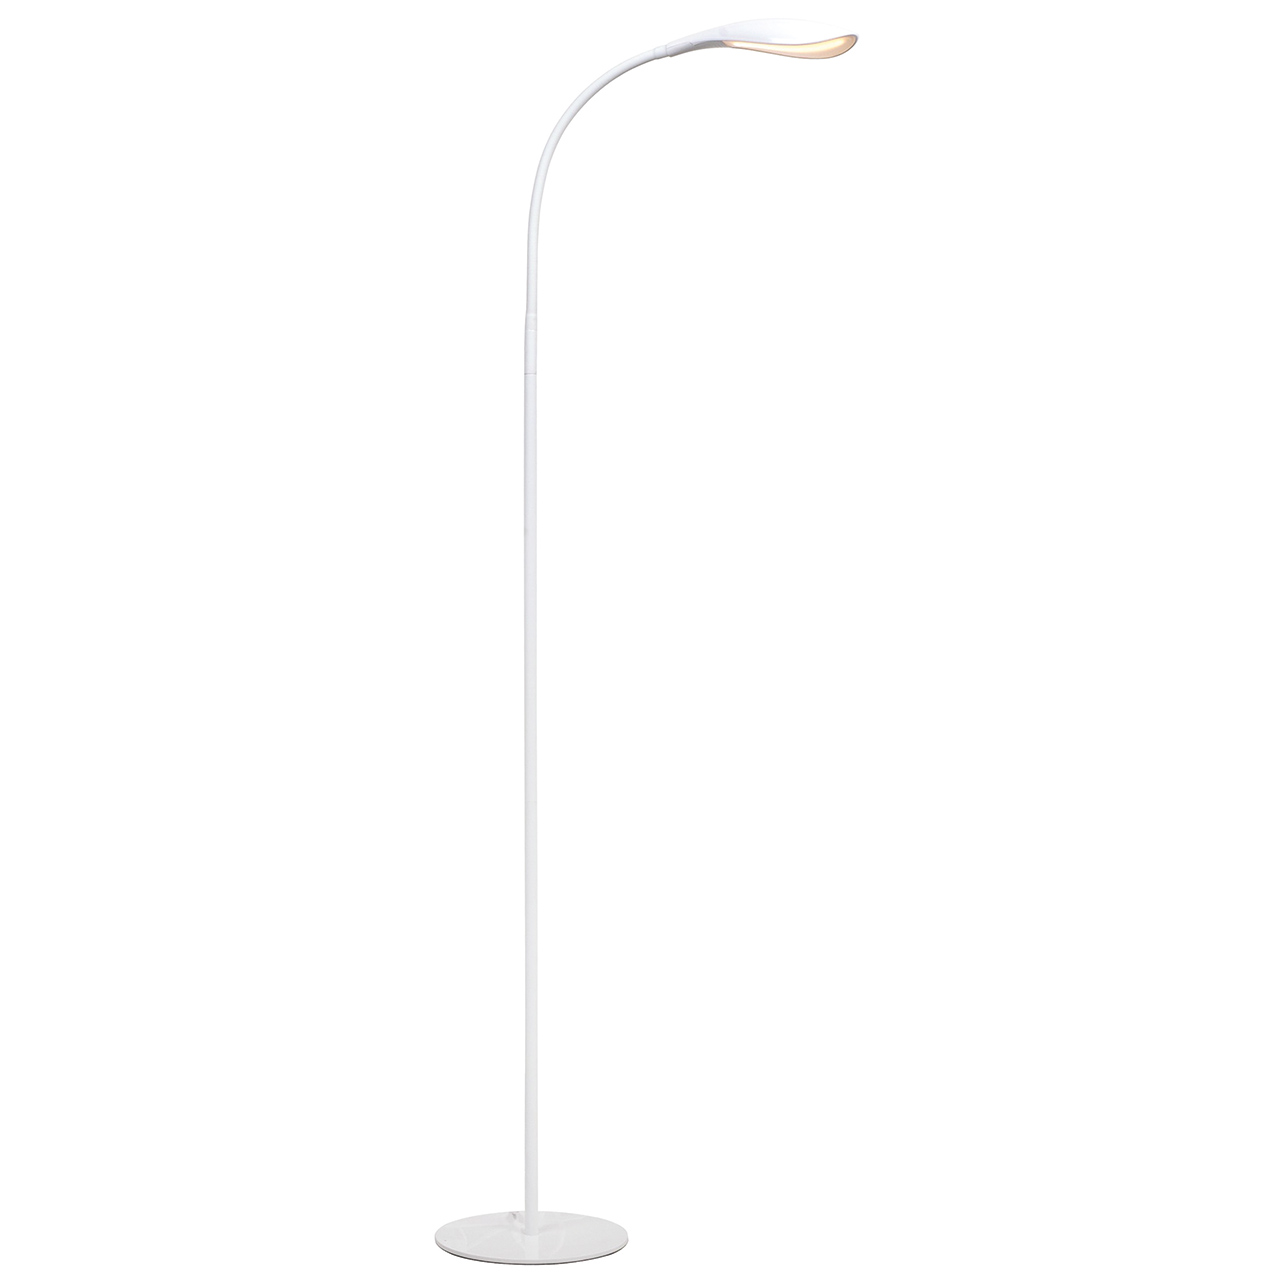 High Vision Tabletop and Floor Standing LED Lamp